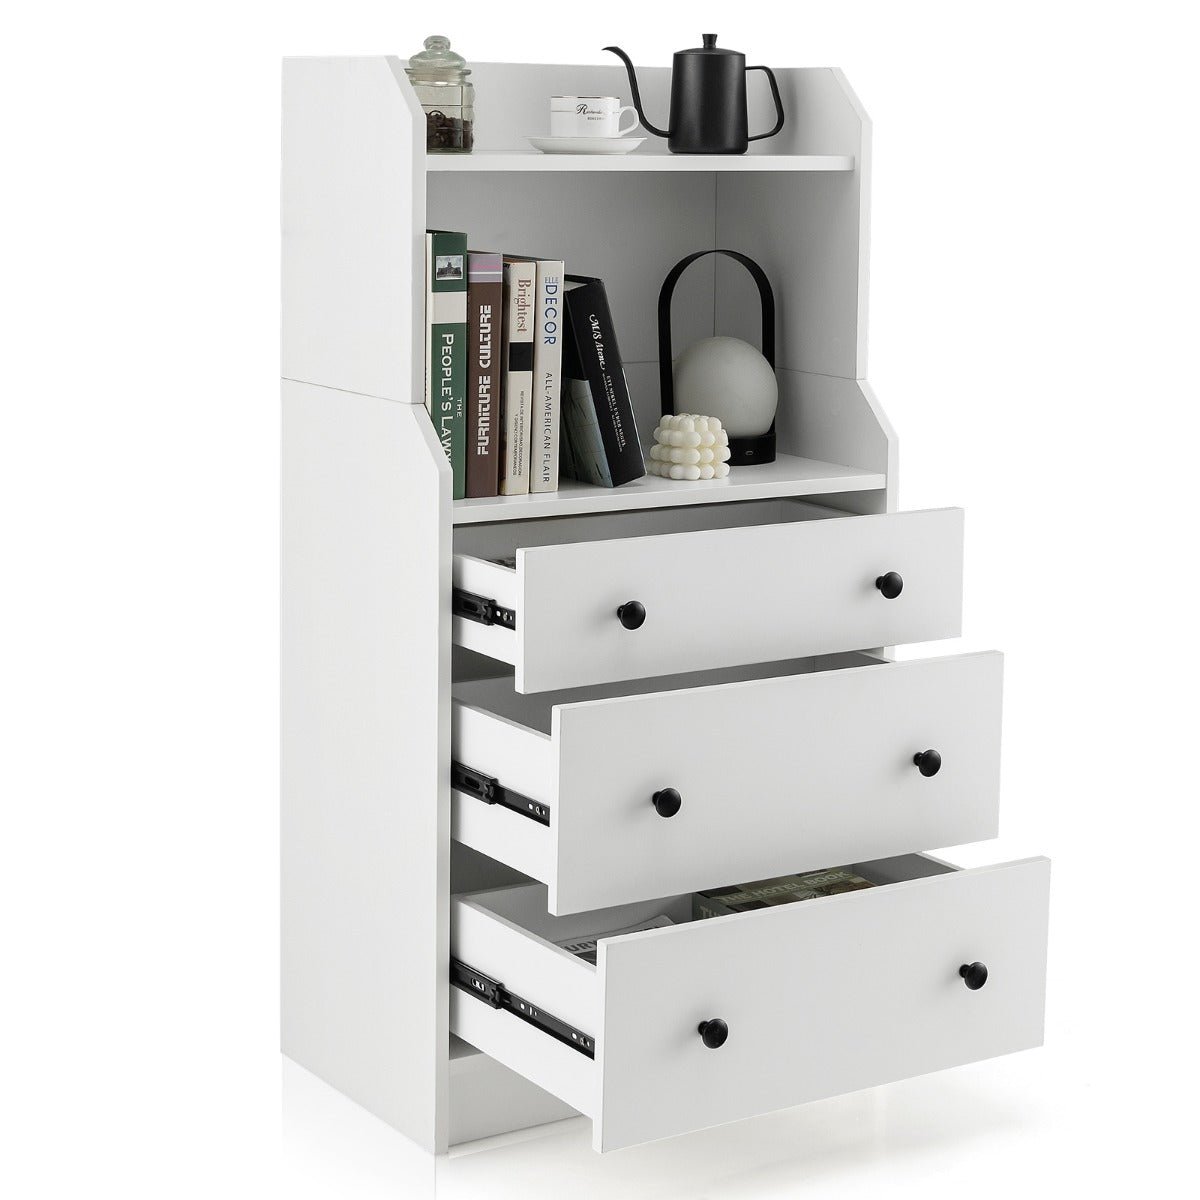 111cm H Storage Organizer with 2 Open Shelves for Living Room